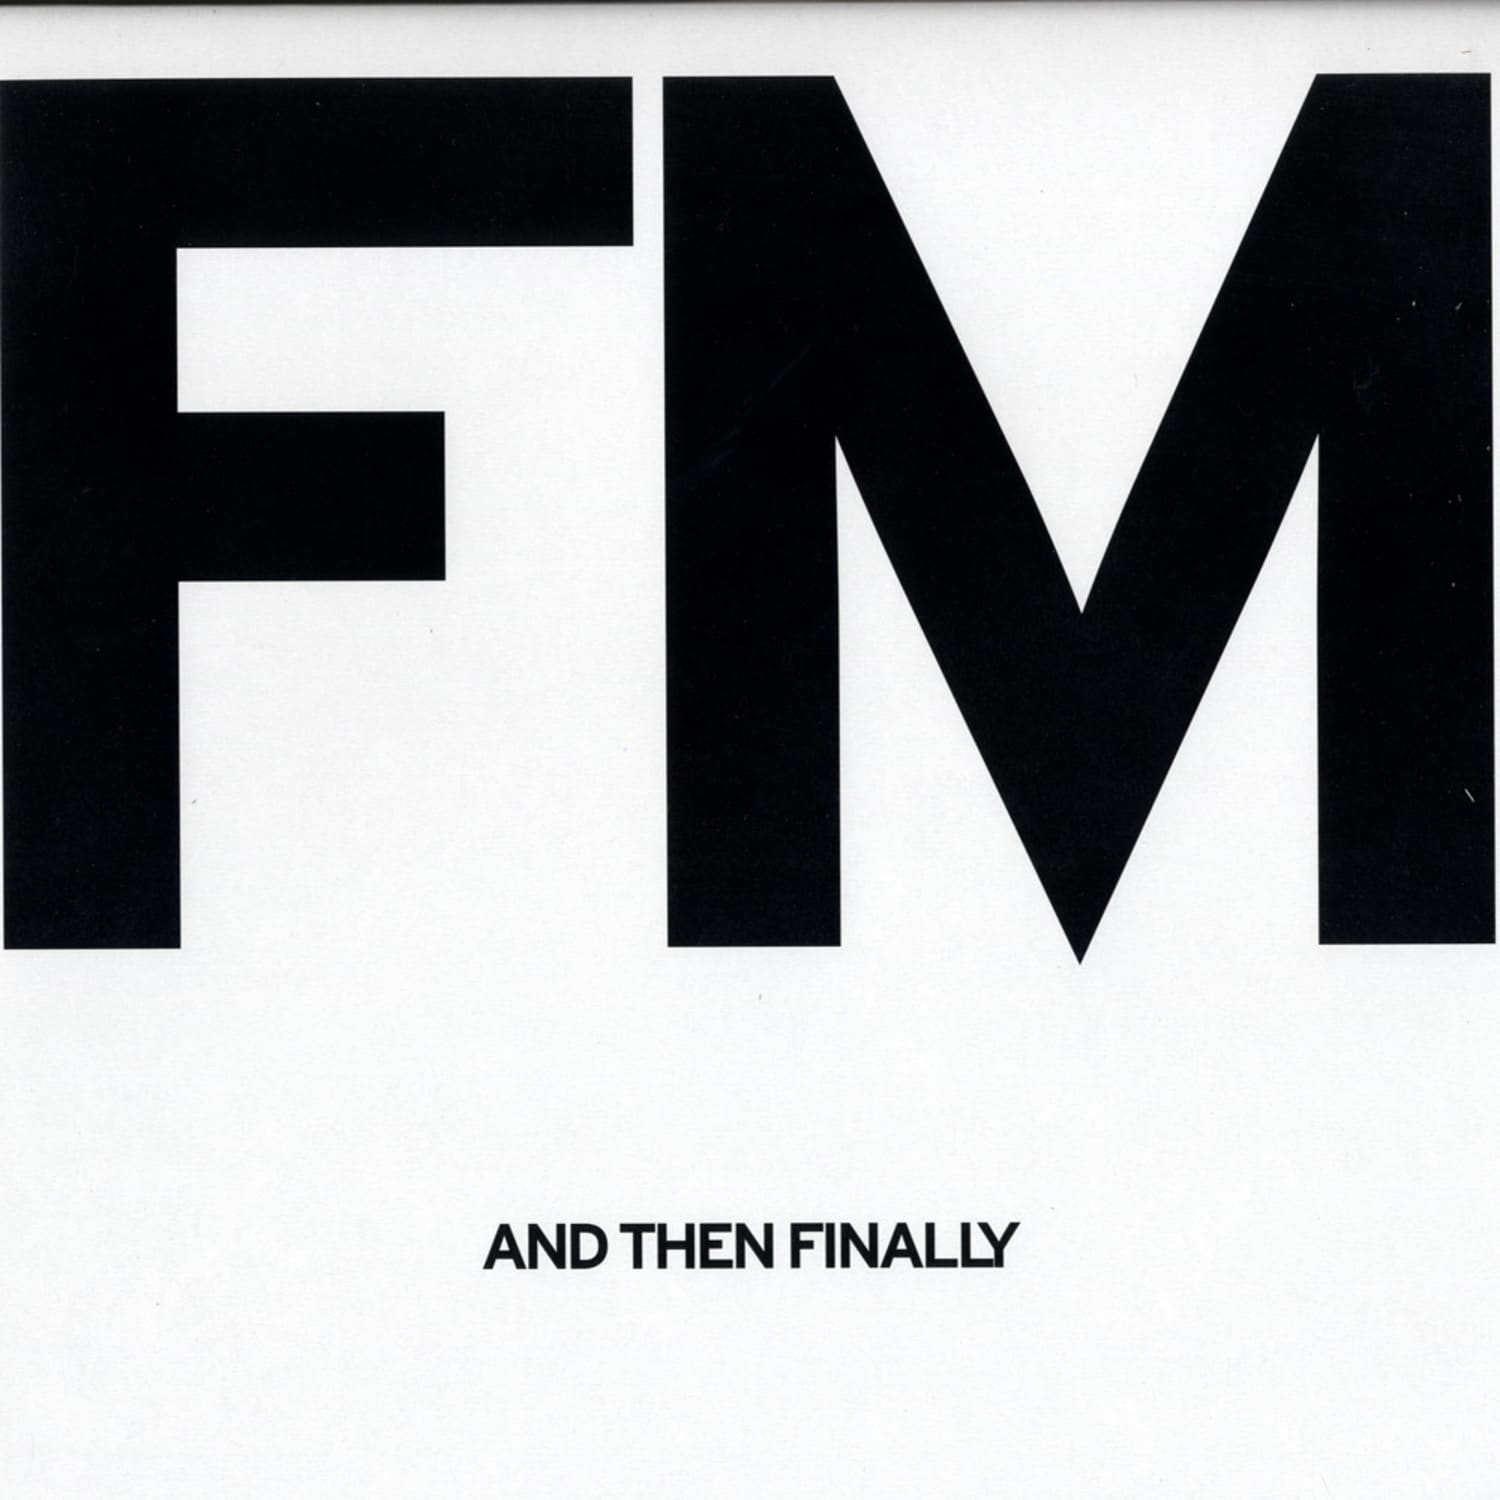 Fixmer / McCarthy - AND THEN FINALLY